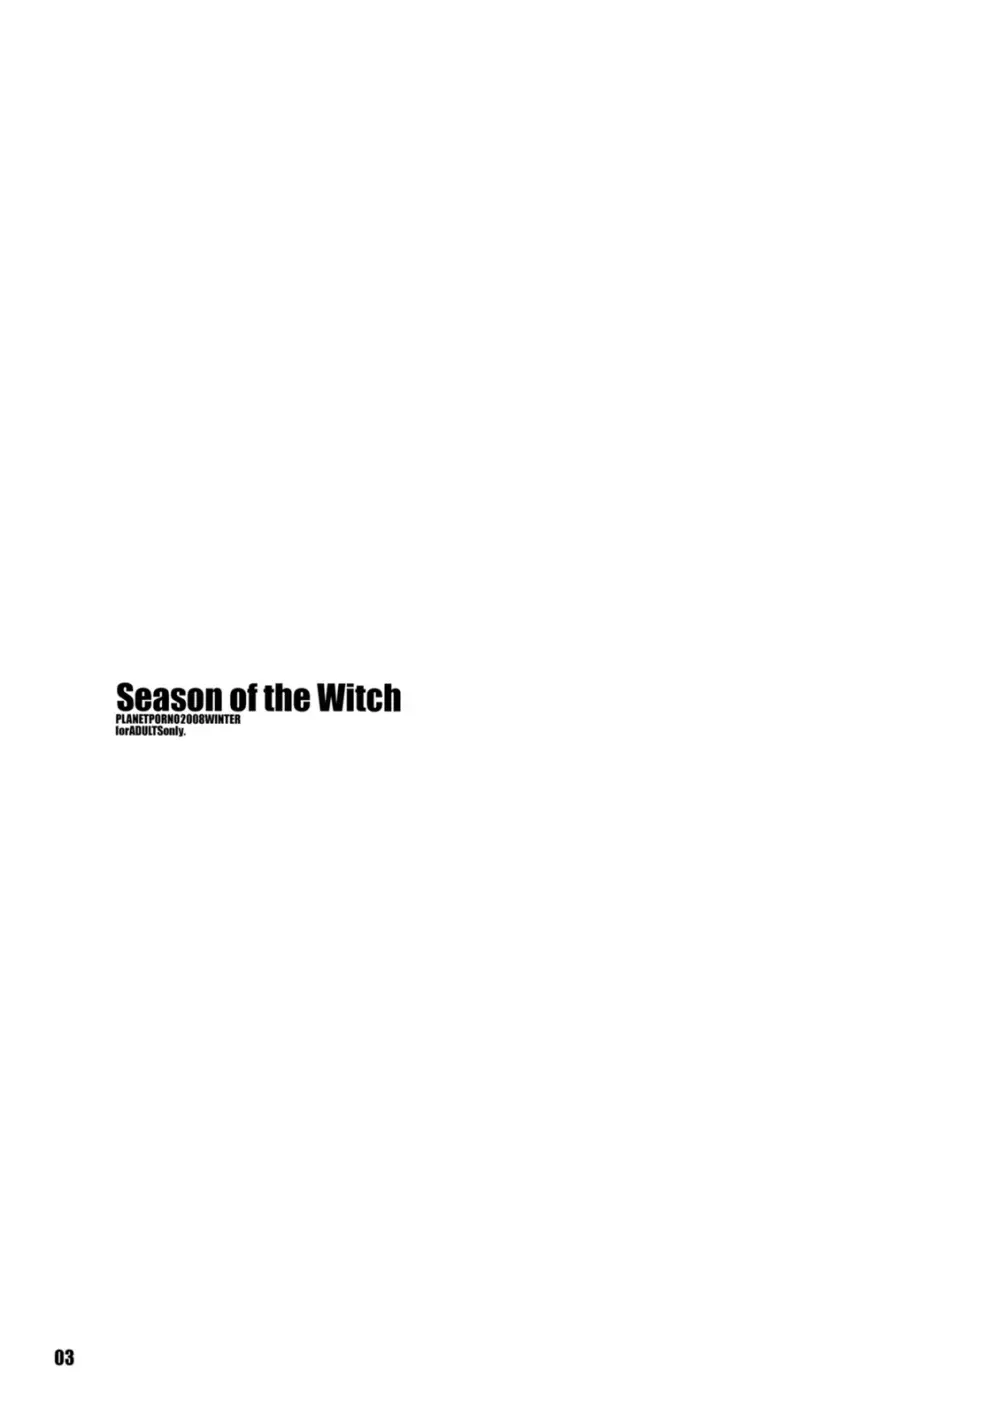 SEASON OF THE WITCH 2ページ